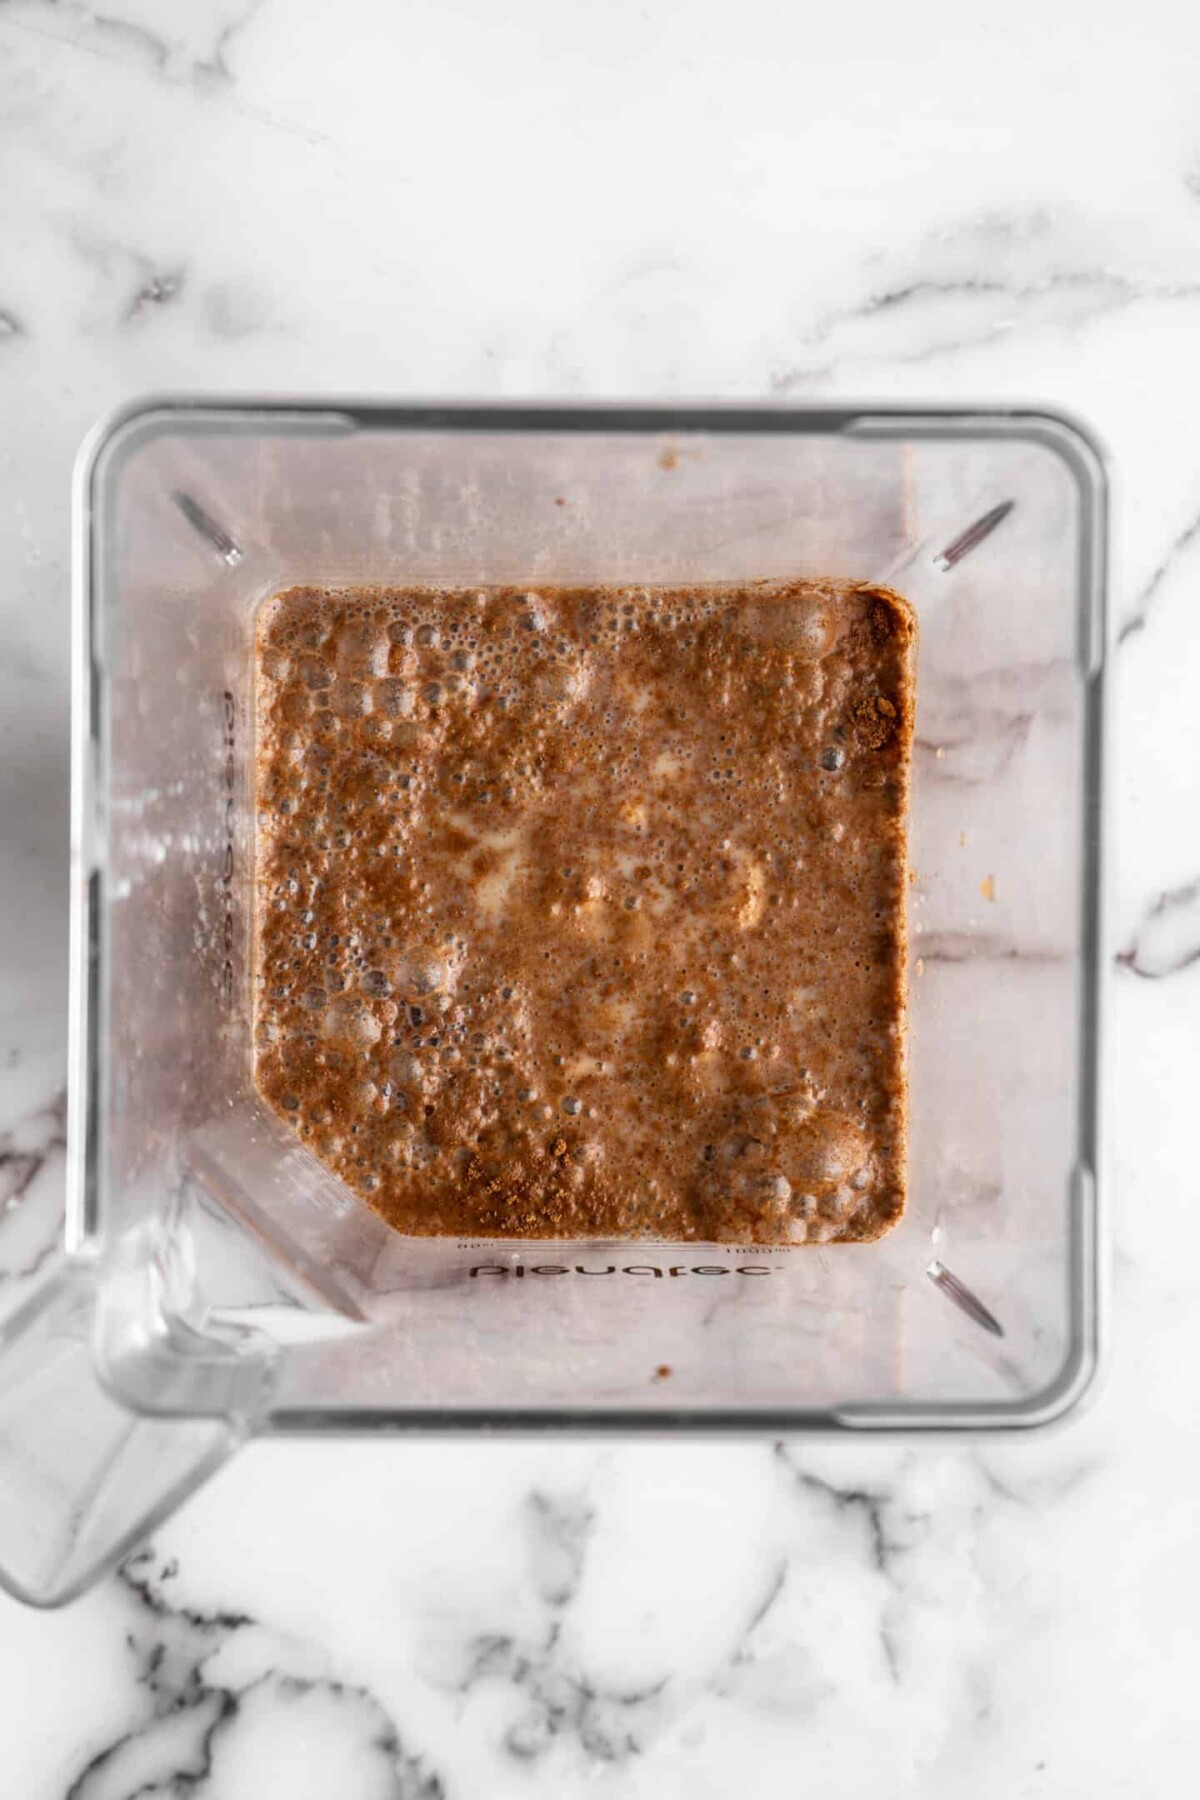 Overhead view of a blender filled with the ingredients for vegan eggnog, unblended, with cinnamon and pumpkin spice resting on the top